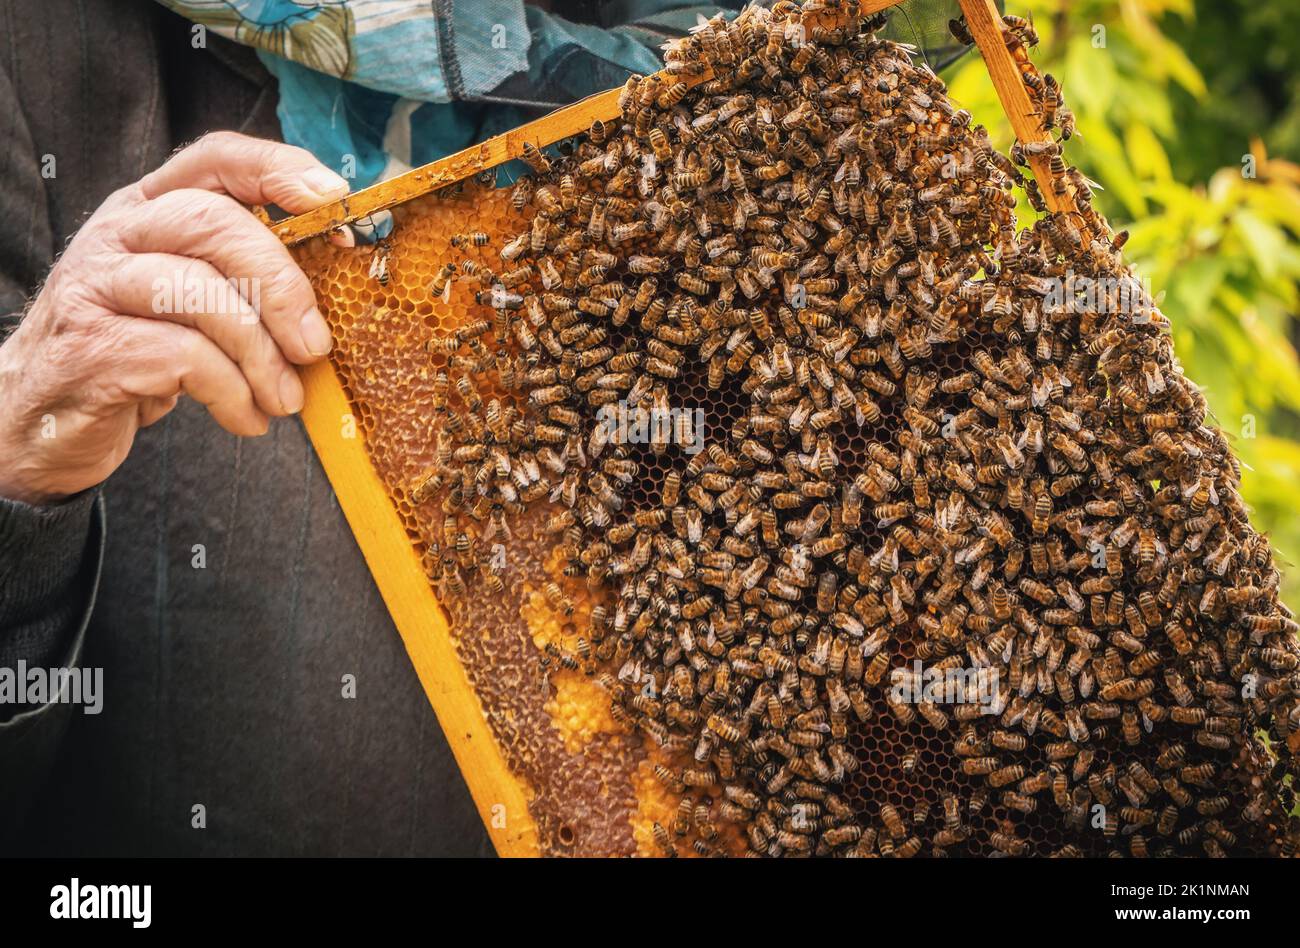 Beekeeper holds honey comb in hands. Apiculture concept. Honeycomb with honey close-up. Stock Photo